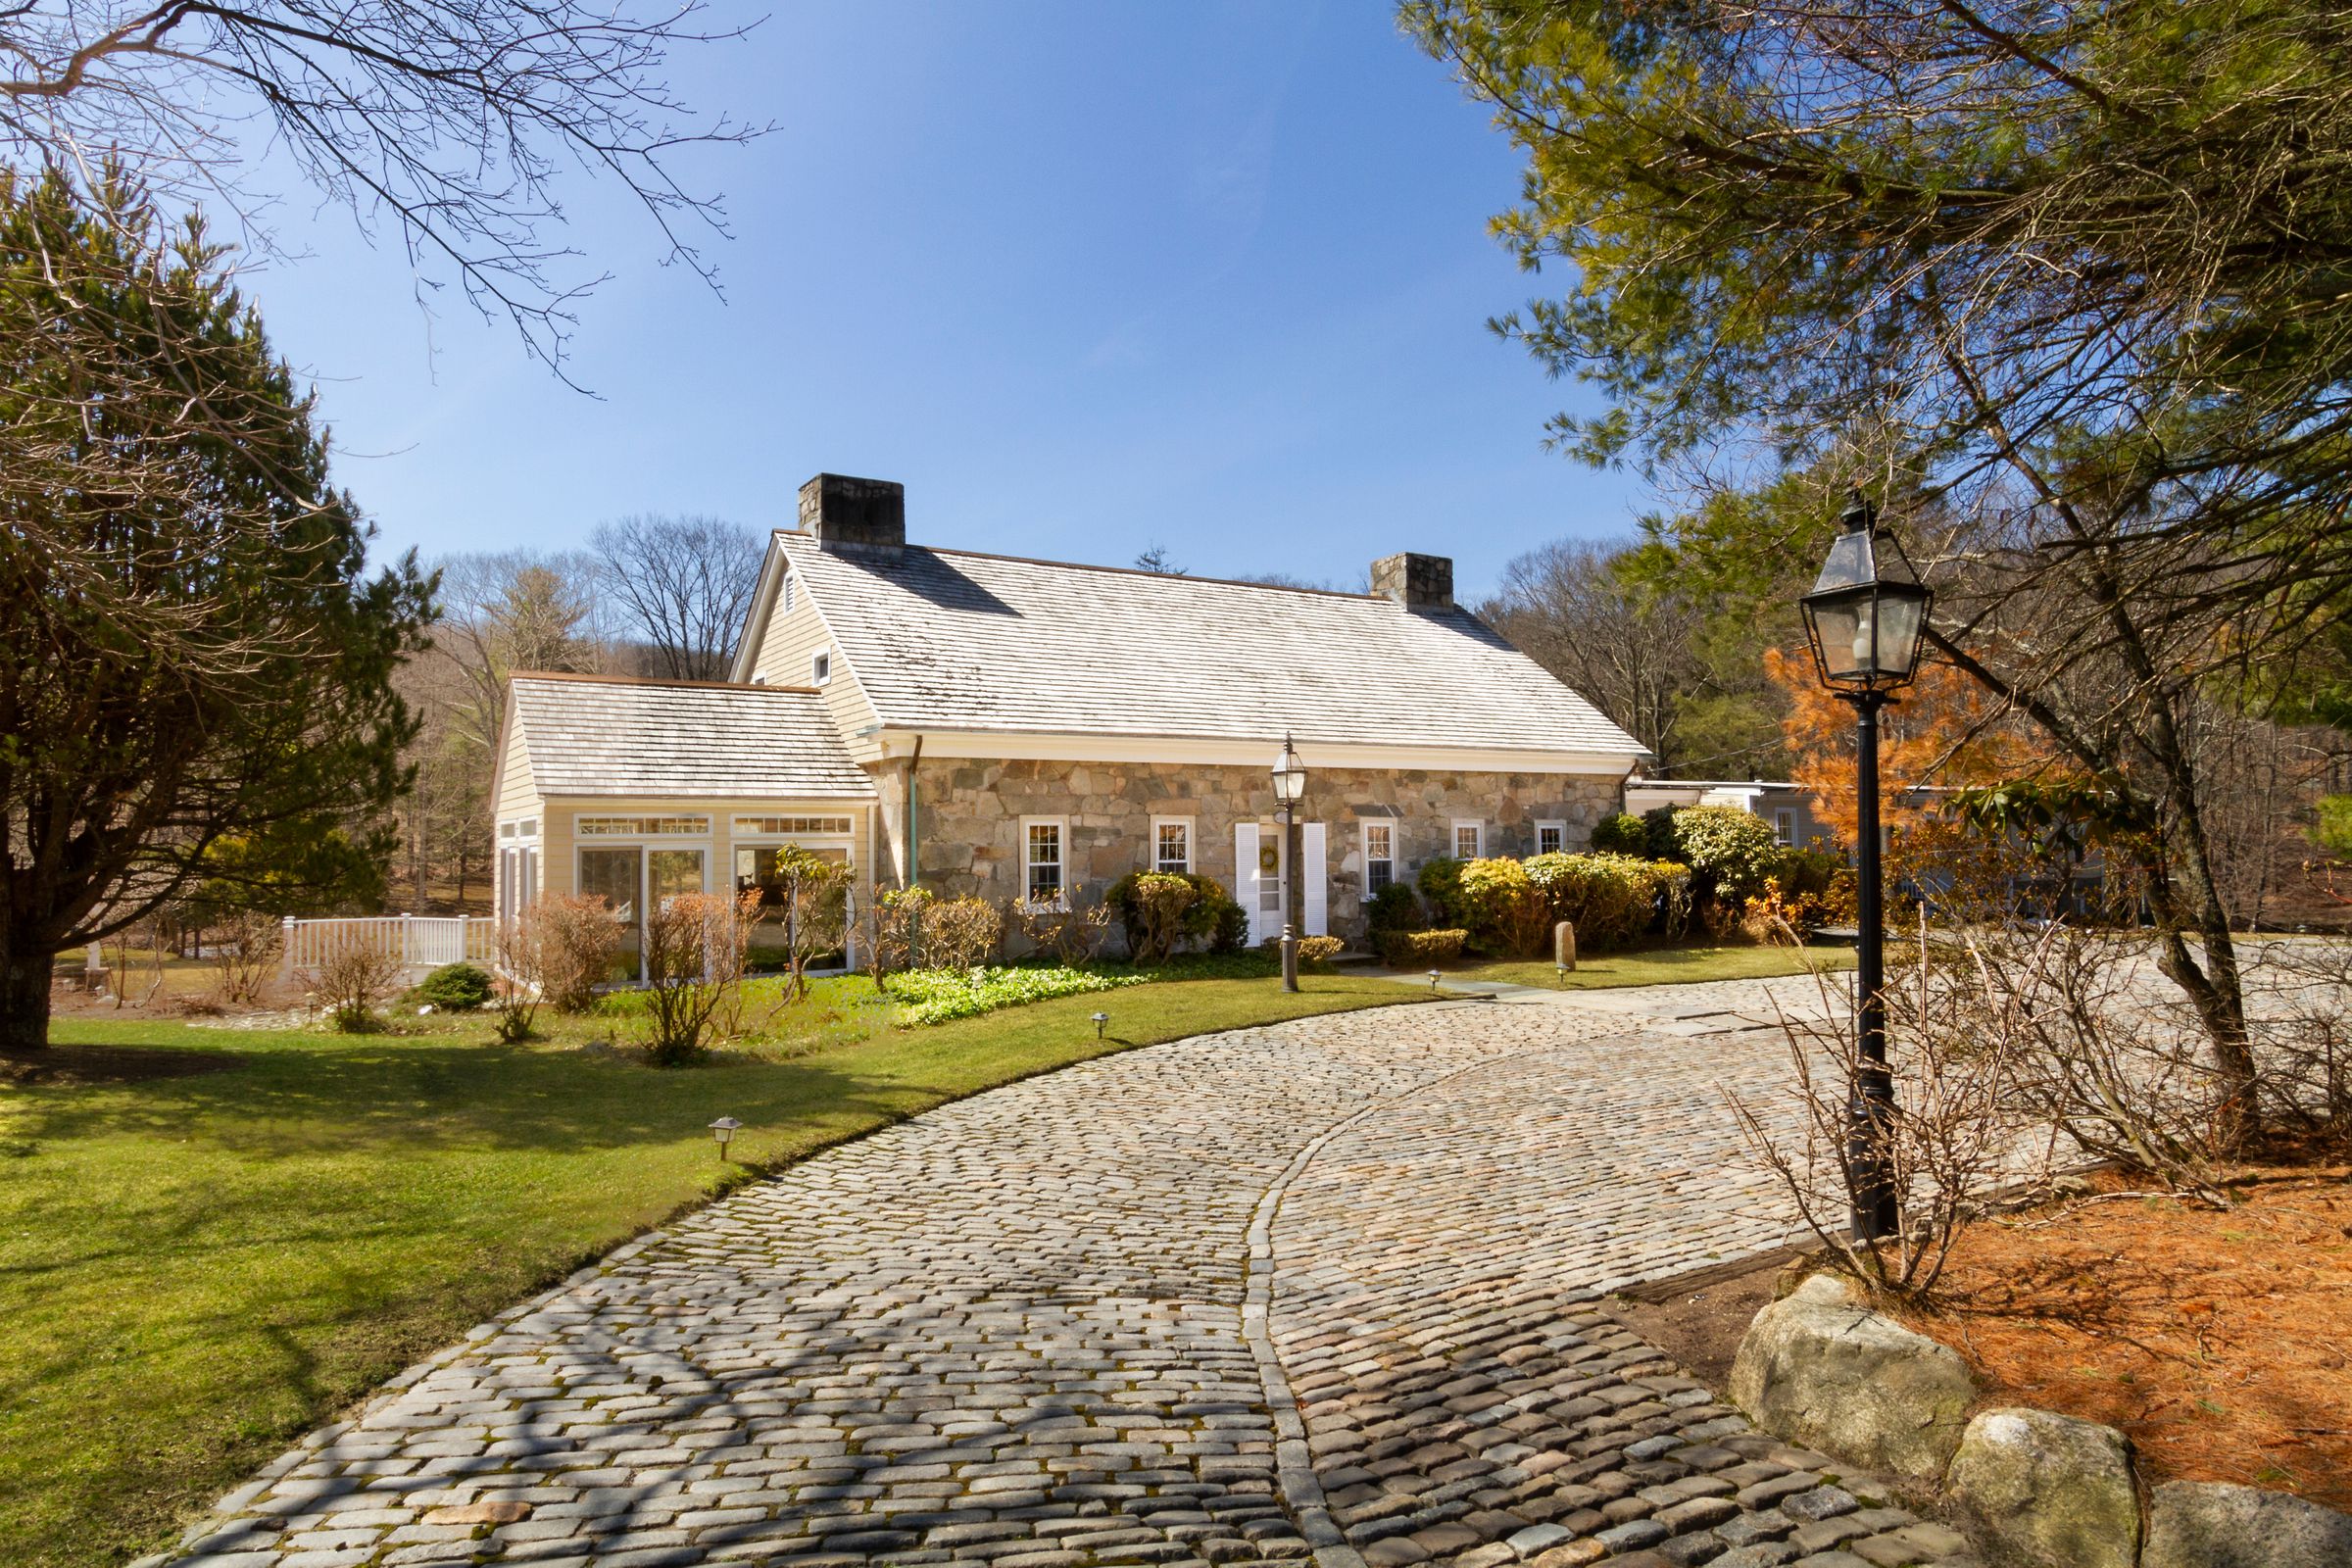 HOUSE LUST: THE MOST EXPENSIVE PROPERTIES IN BLACKSTONE VALLEY